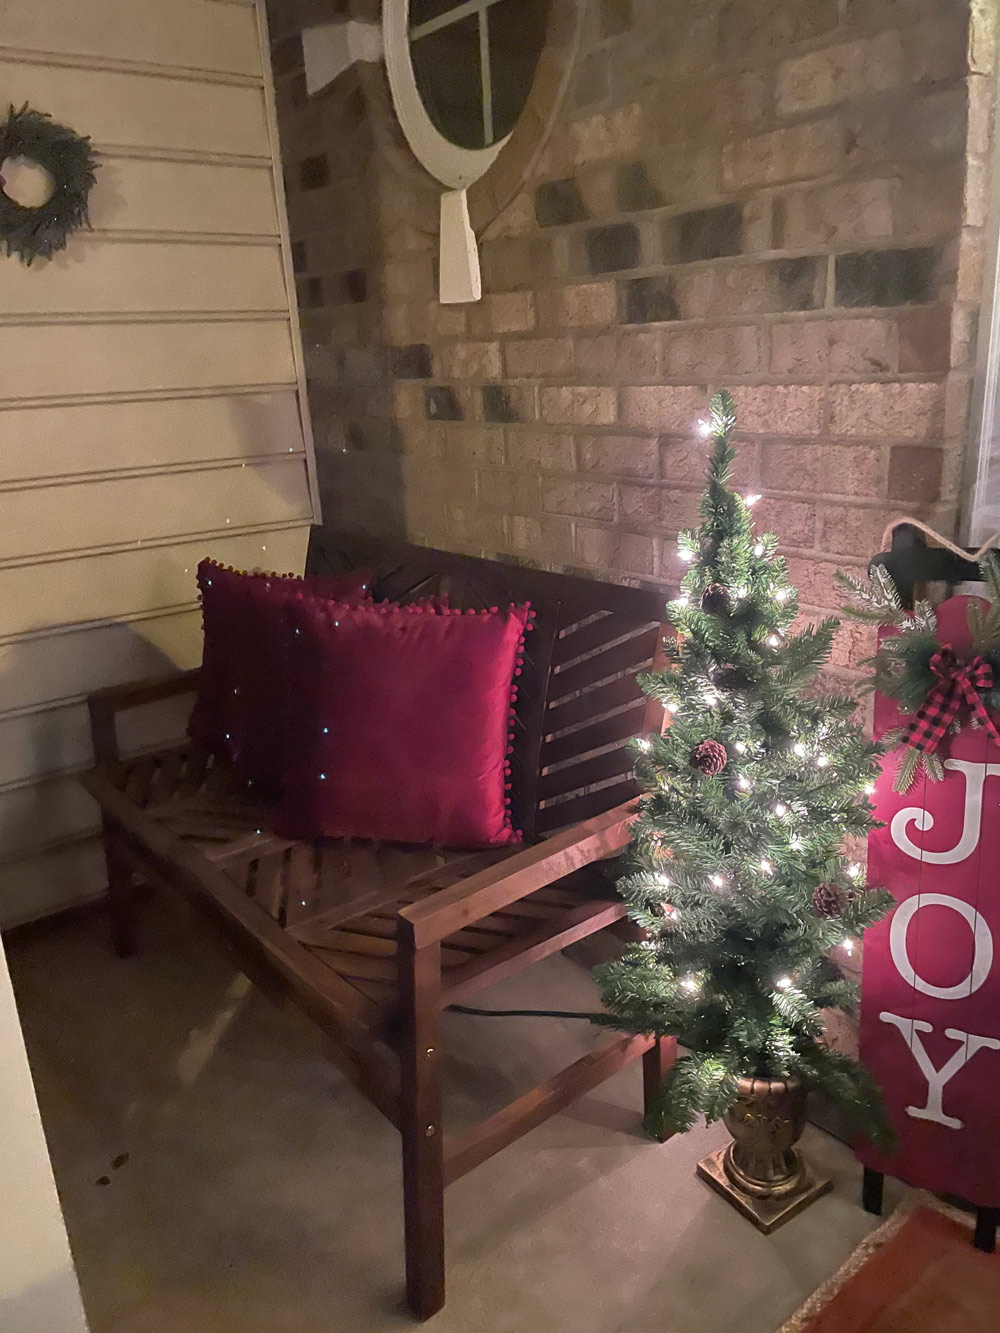 Front porch with a lit mini tree, JOY sign, and burgundy pillows on a bench.